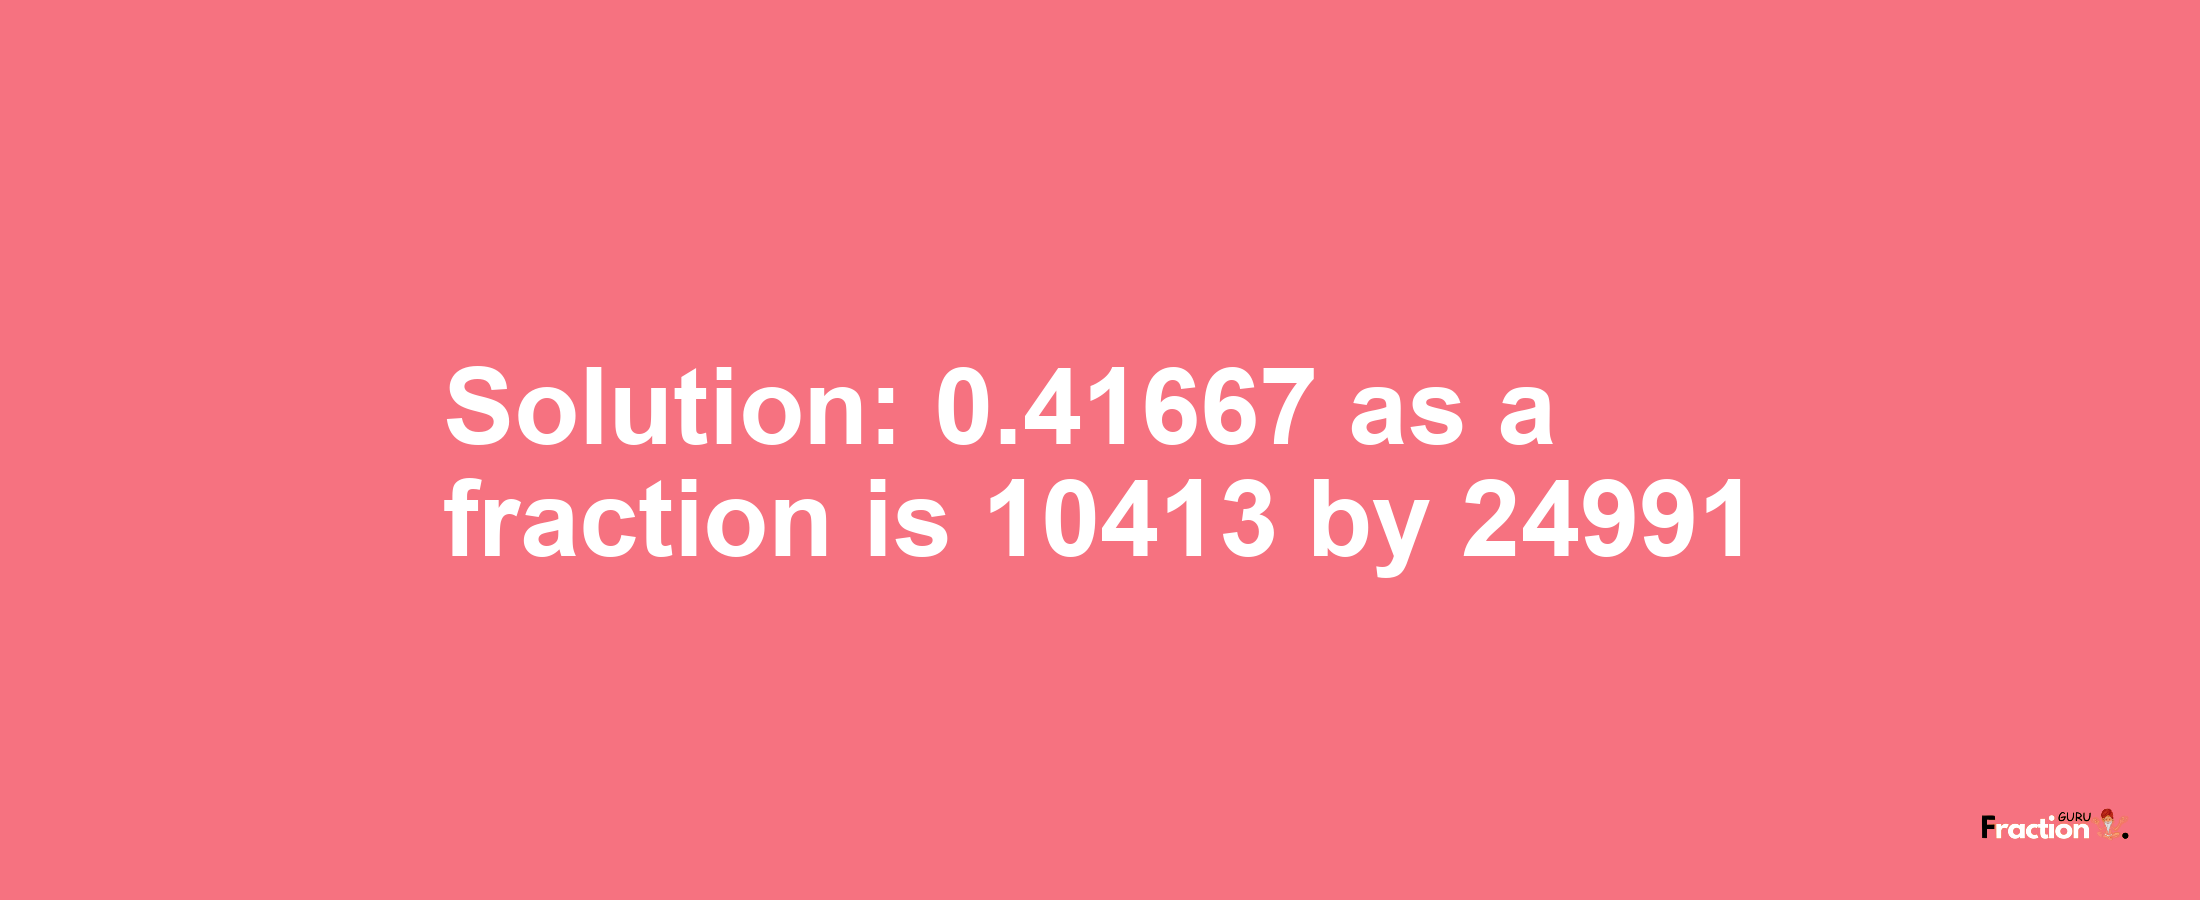 Solution:0.41667 as a fraction is 10413/24991